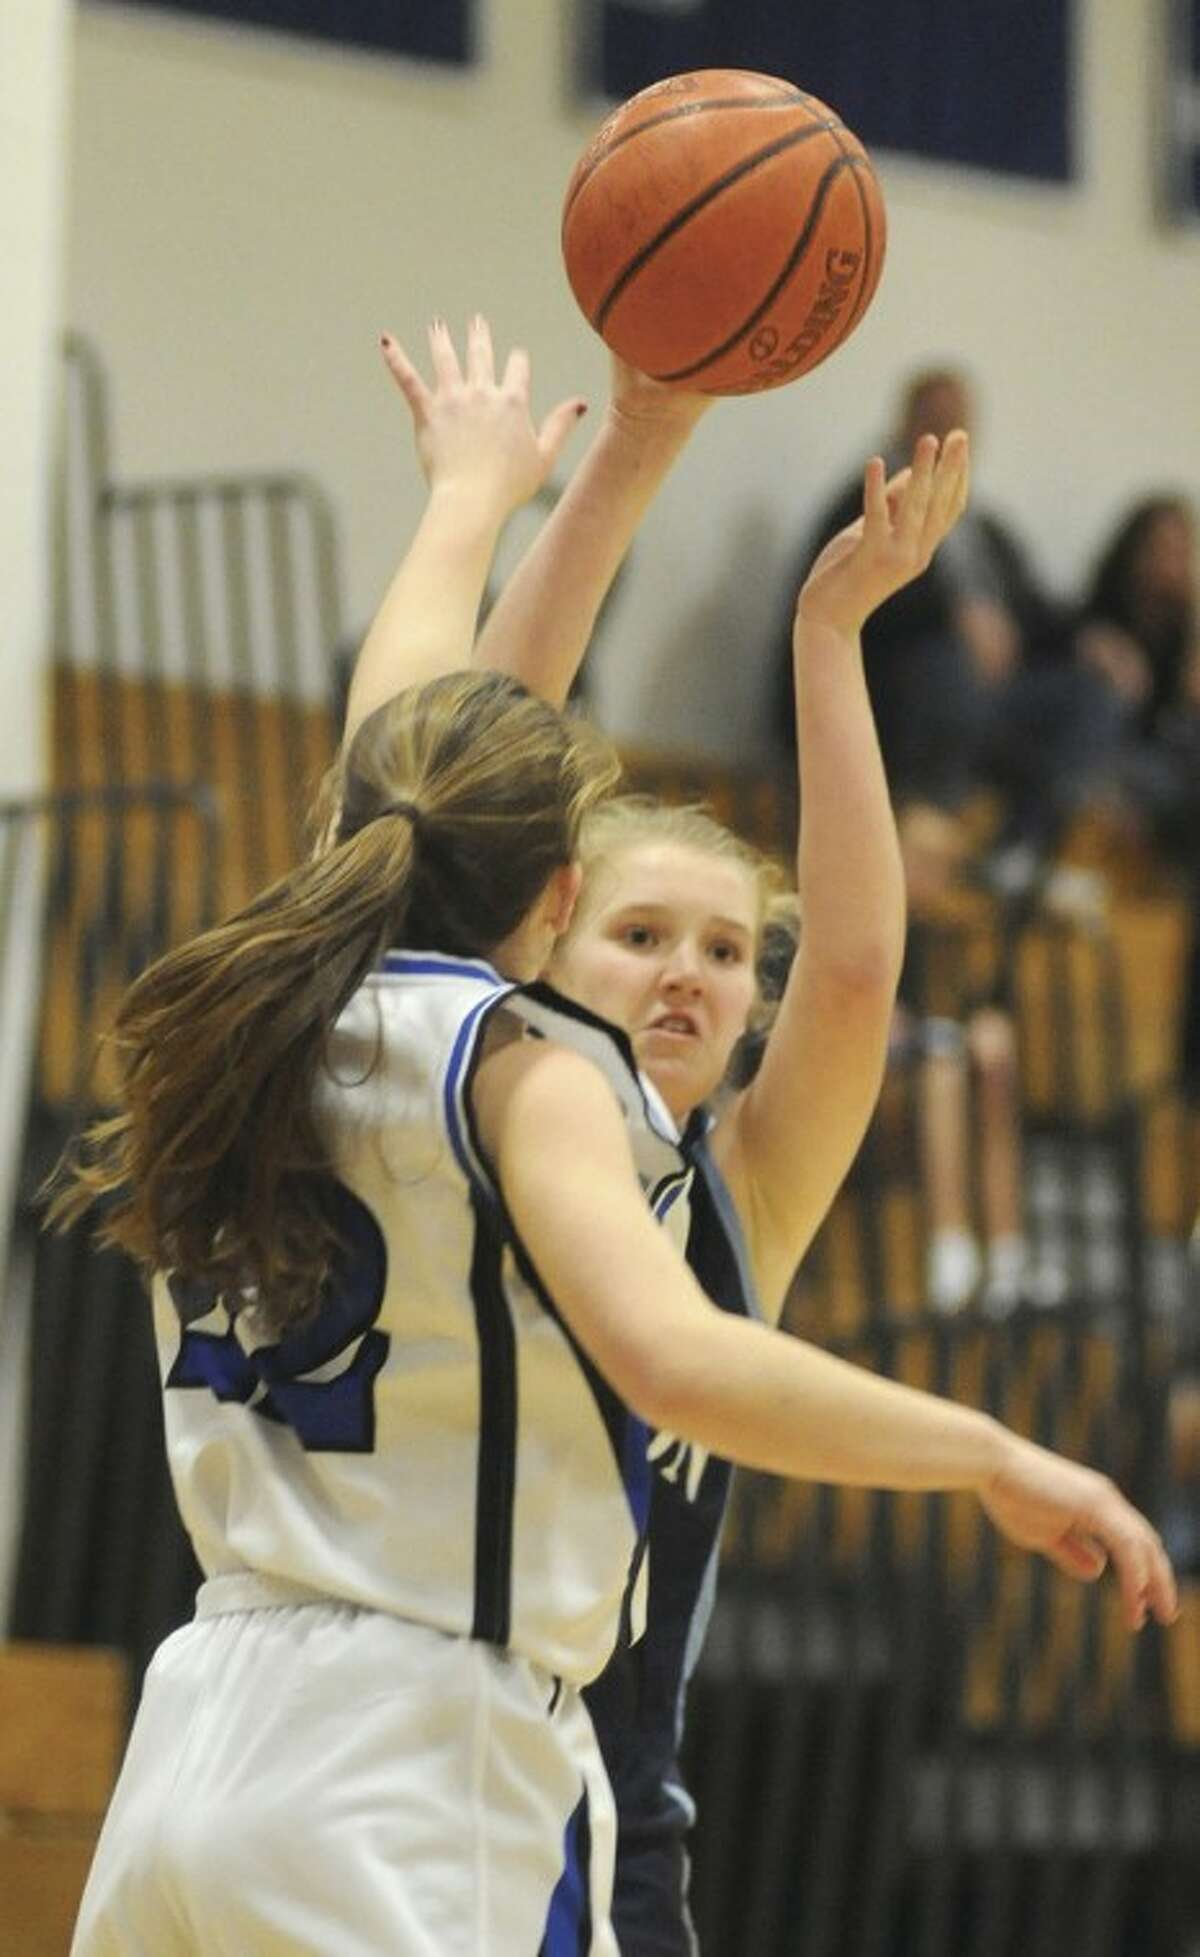 Hour photo/John Nash Wilton's Erin Cunningham, rear, looks to pass into the post as Darien's Susan Biggart defends during Tuesday's game.